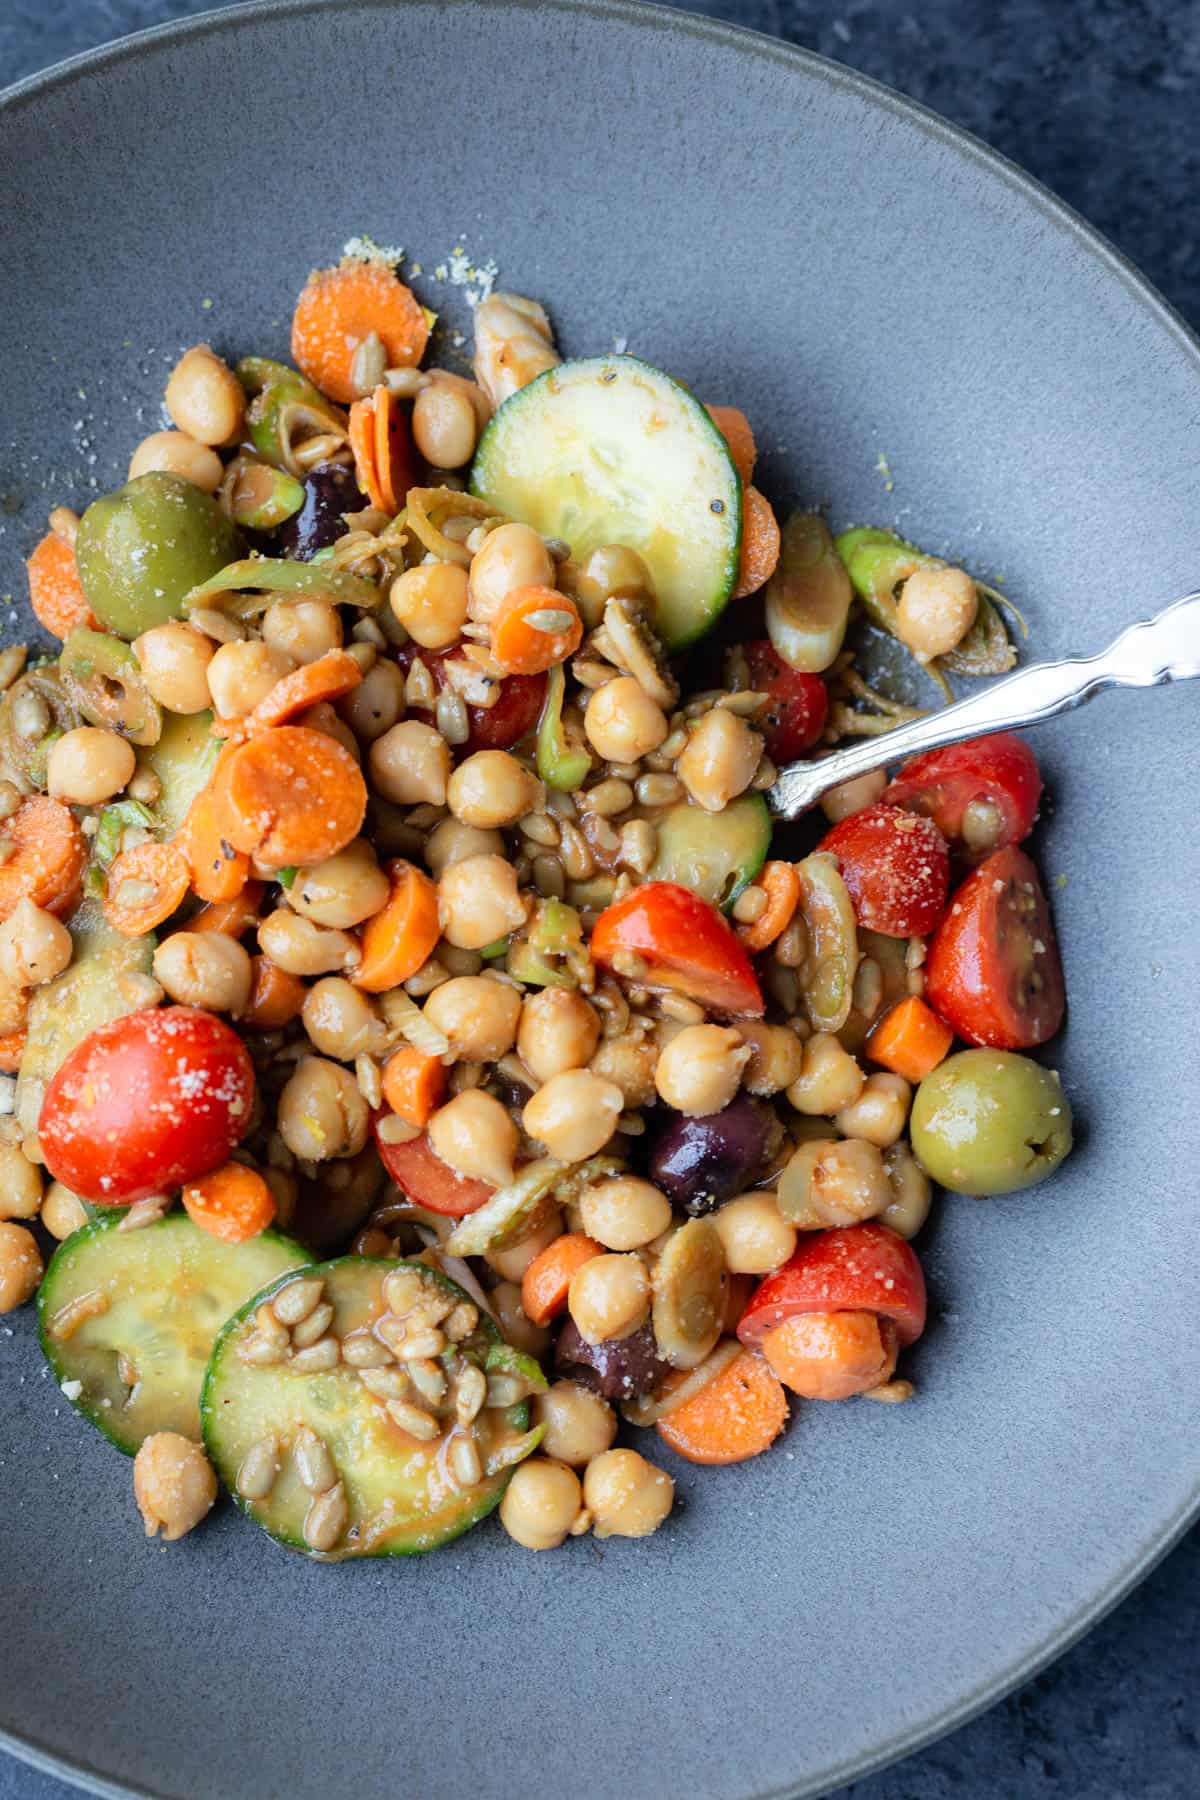 a mixed up bowl of a lettuceless salad of cucumbers, tomatoes, sunflower seeds, green onions, chickpeas, olives, and carrots